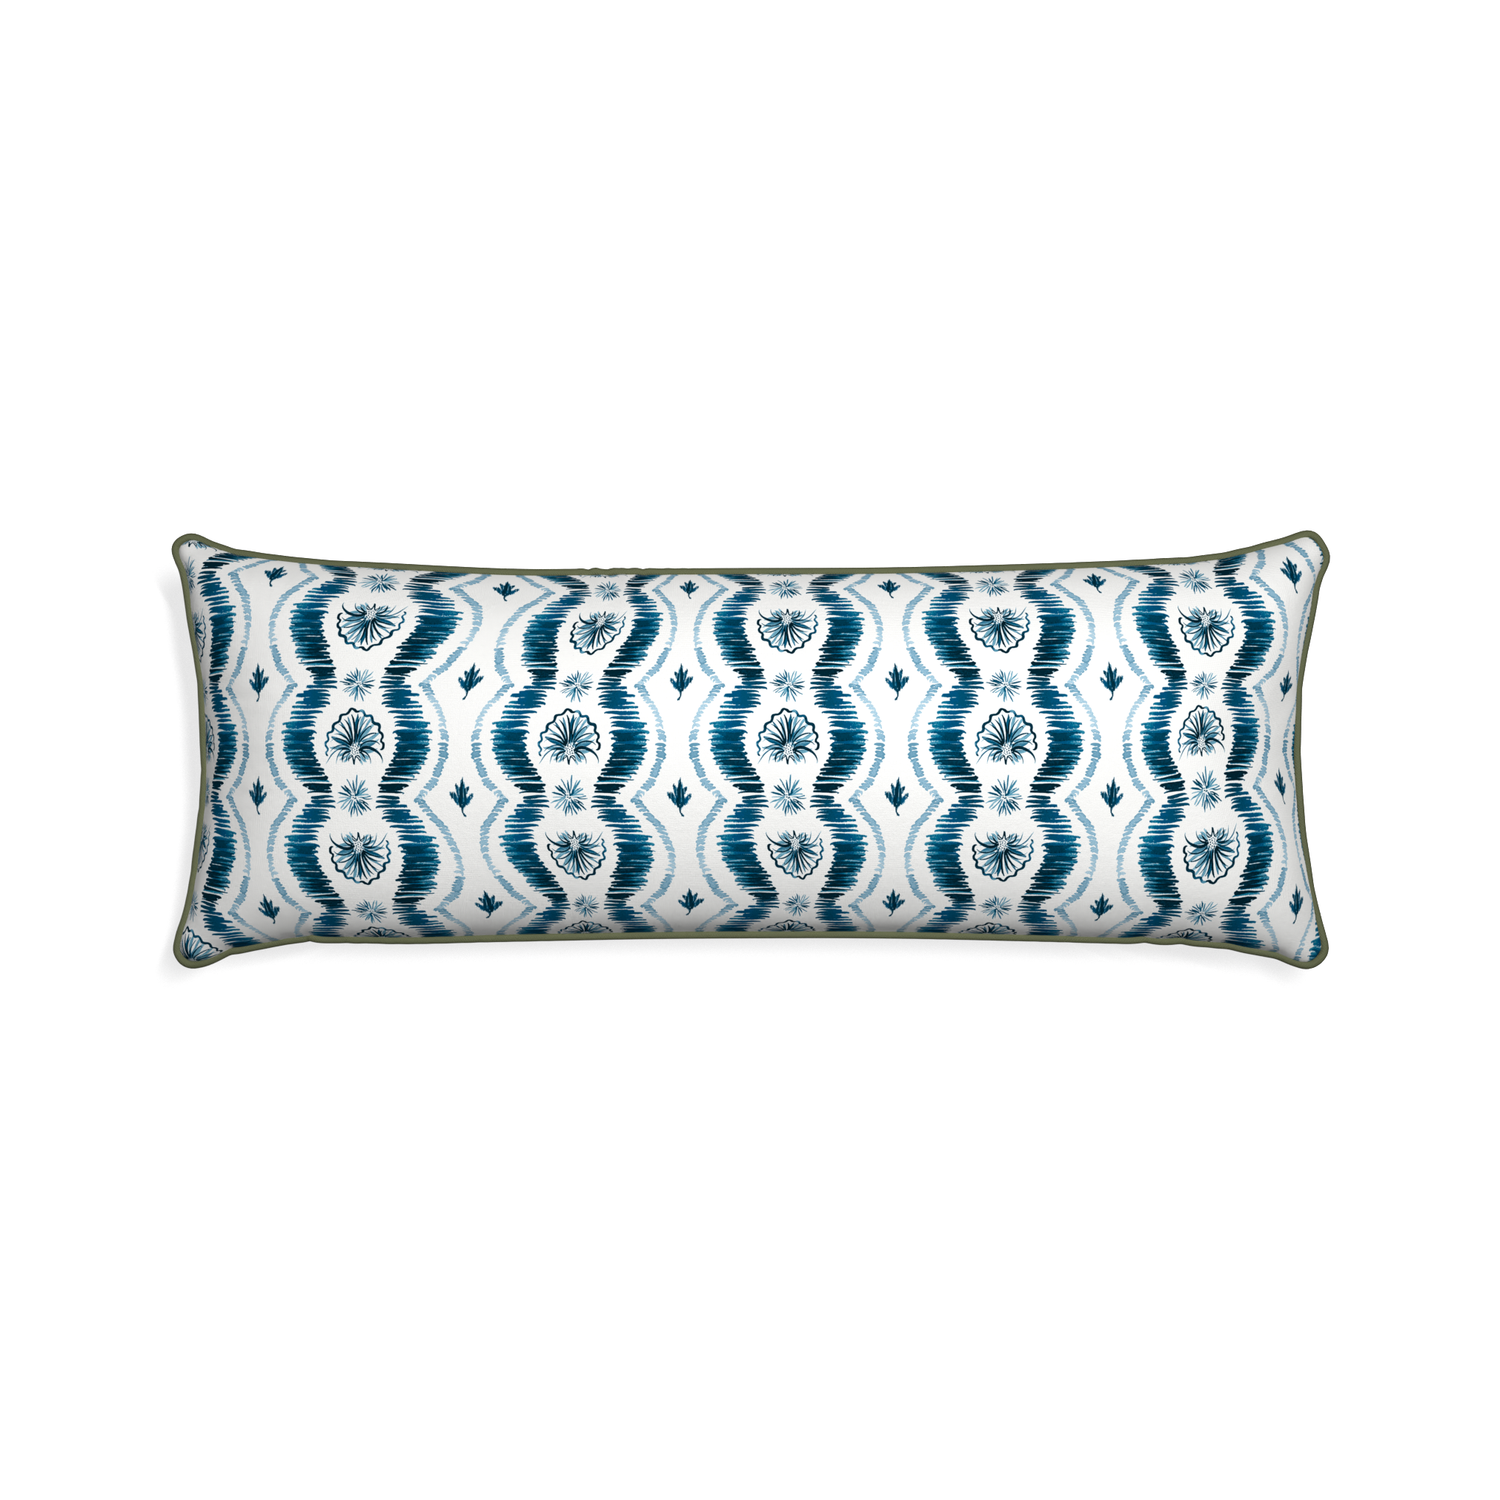 Xl-lumbar alice custom blue ikatpillow with f piping on white background